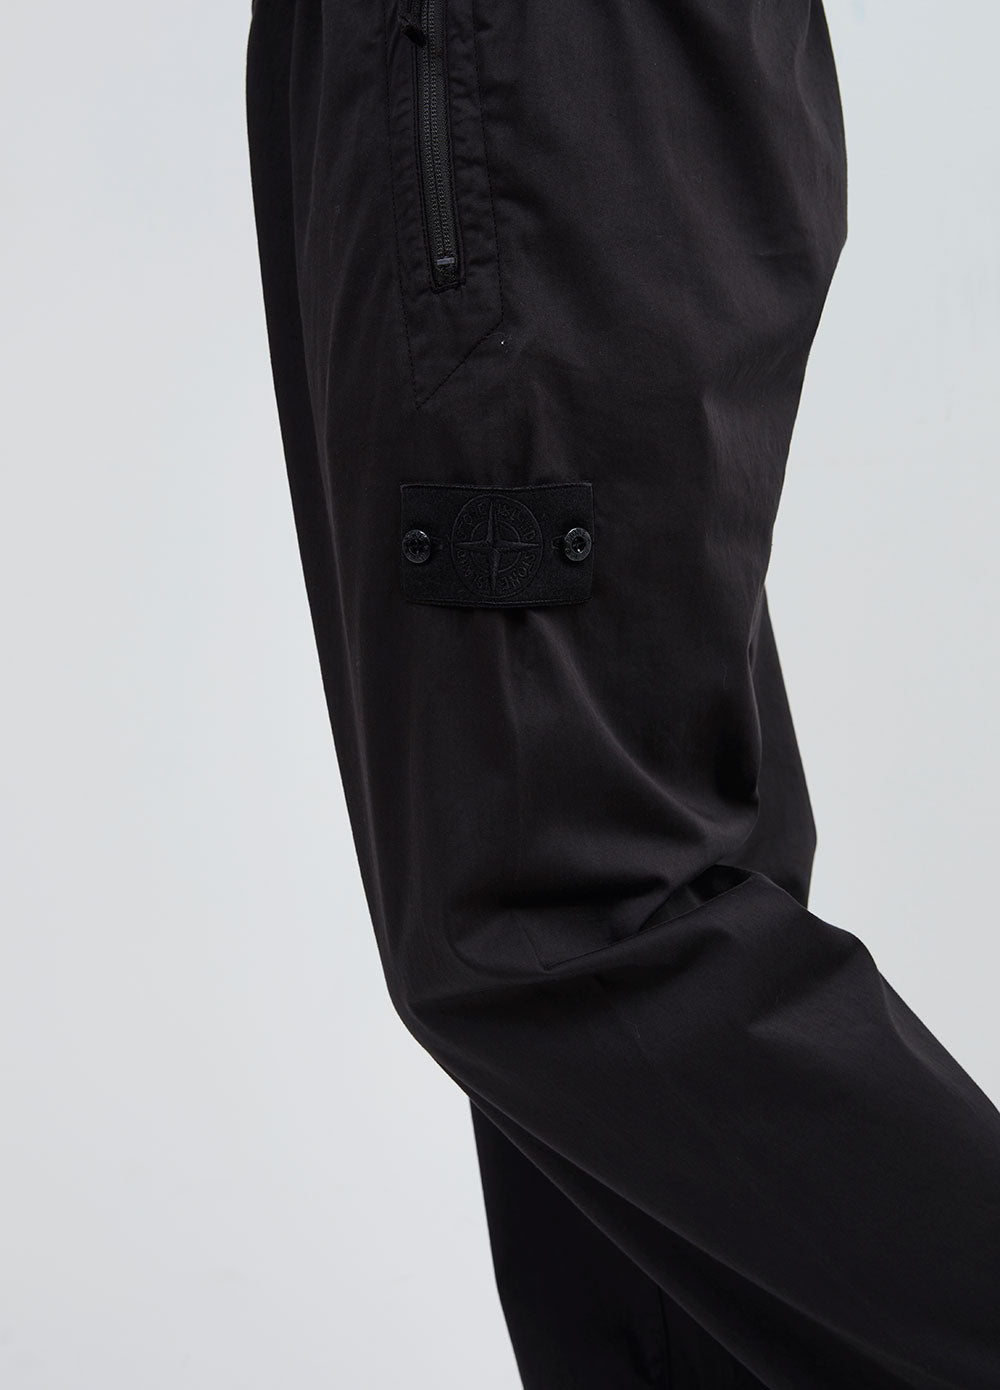 Fixed Waist Trousers